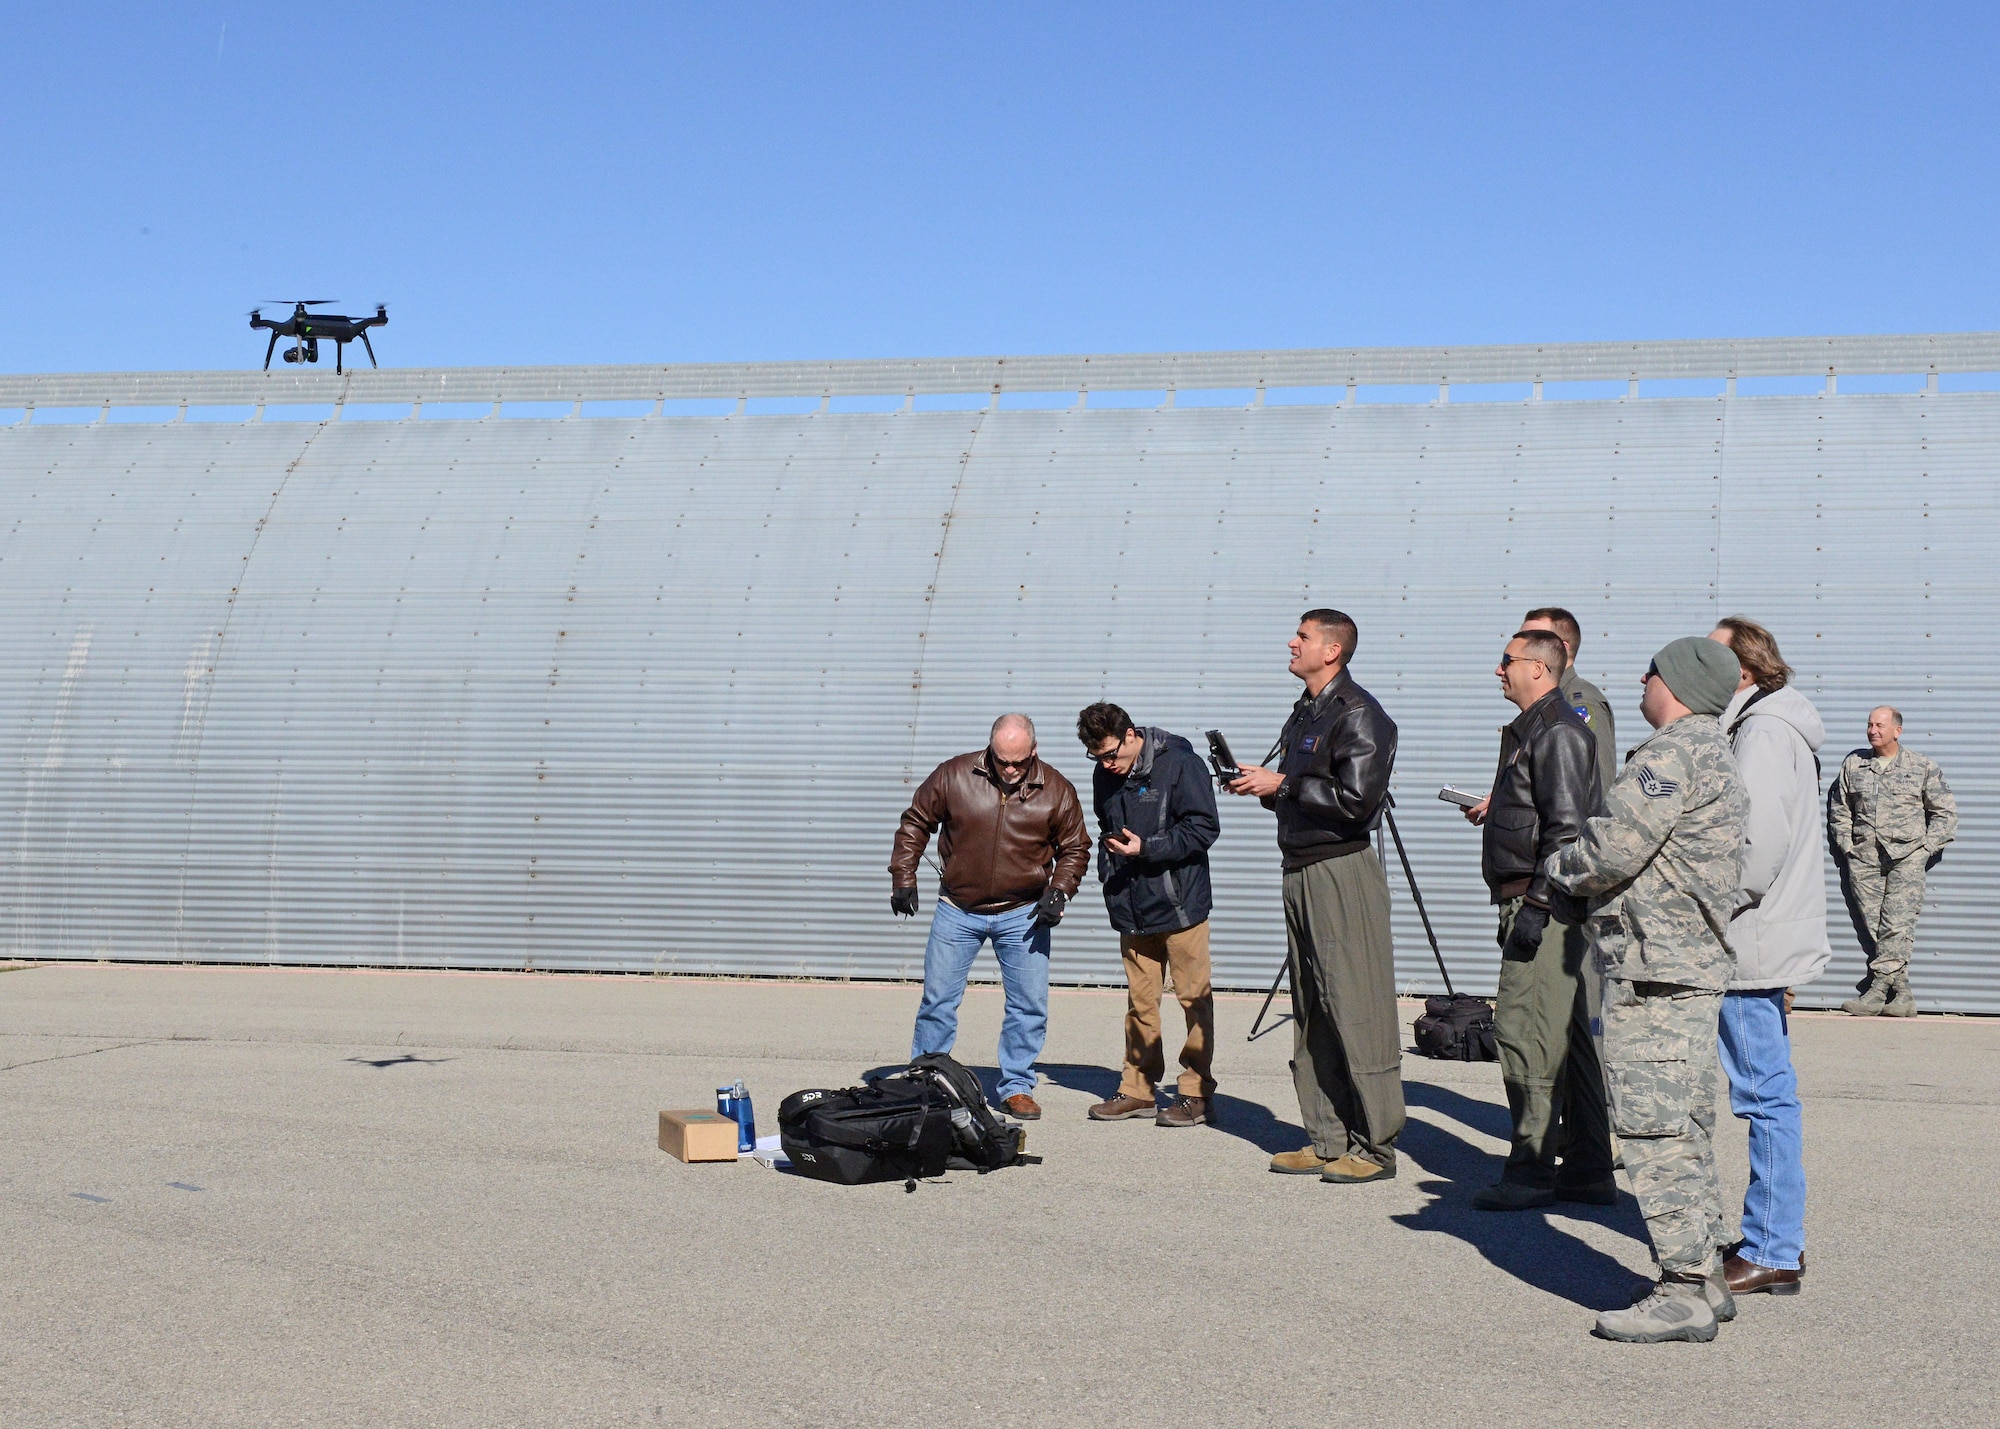 The 412th Test Wing’s Emerging Technologies Combined Test Force conducted three test sorties March 6 using a quadcopter to inspect a C-17 Globemaster III. Maj. Dan Riley, ET CTF director, and Maj. William Niblack, ET CTF operations officer, piloted the small unmanned aerial system. (U.S. Air Force photo by Kenji Thuloweit)